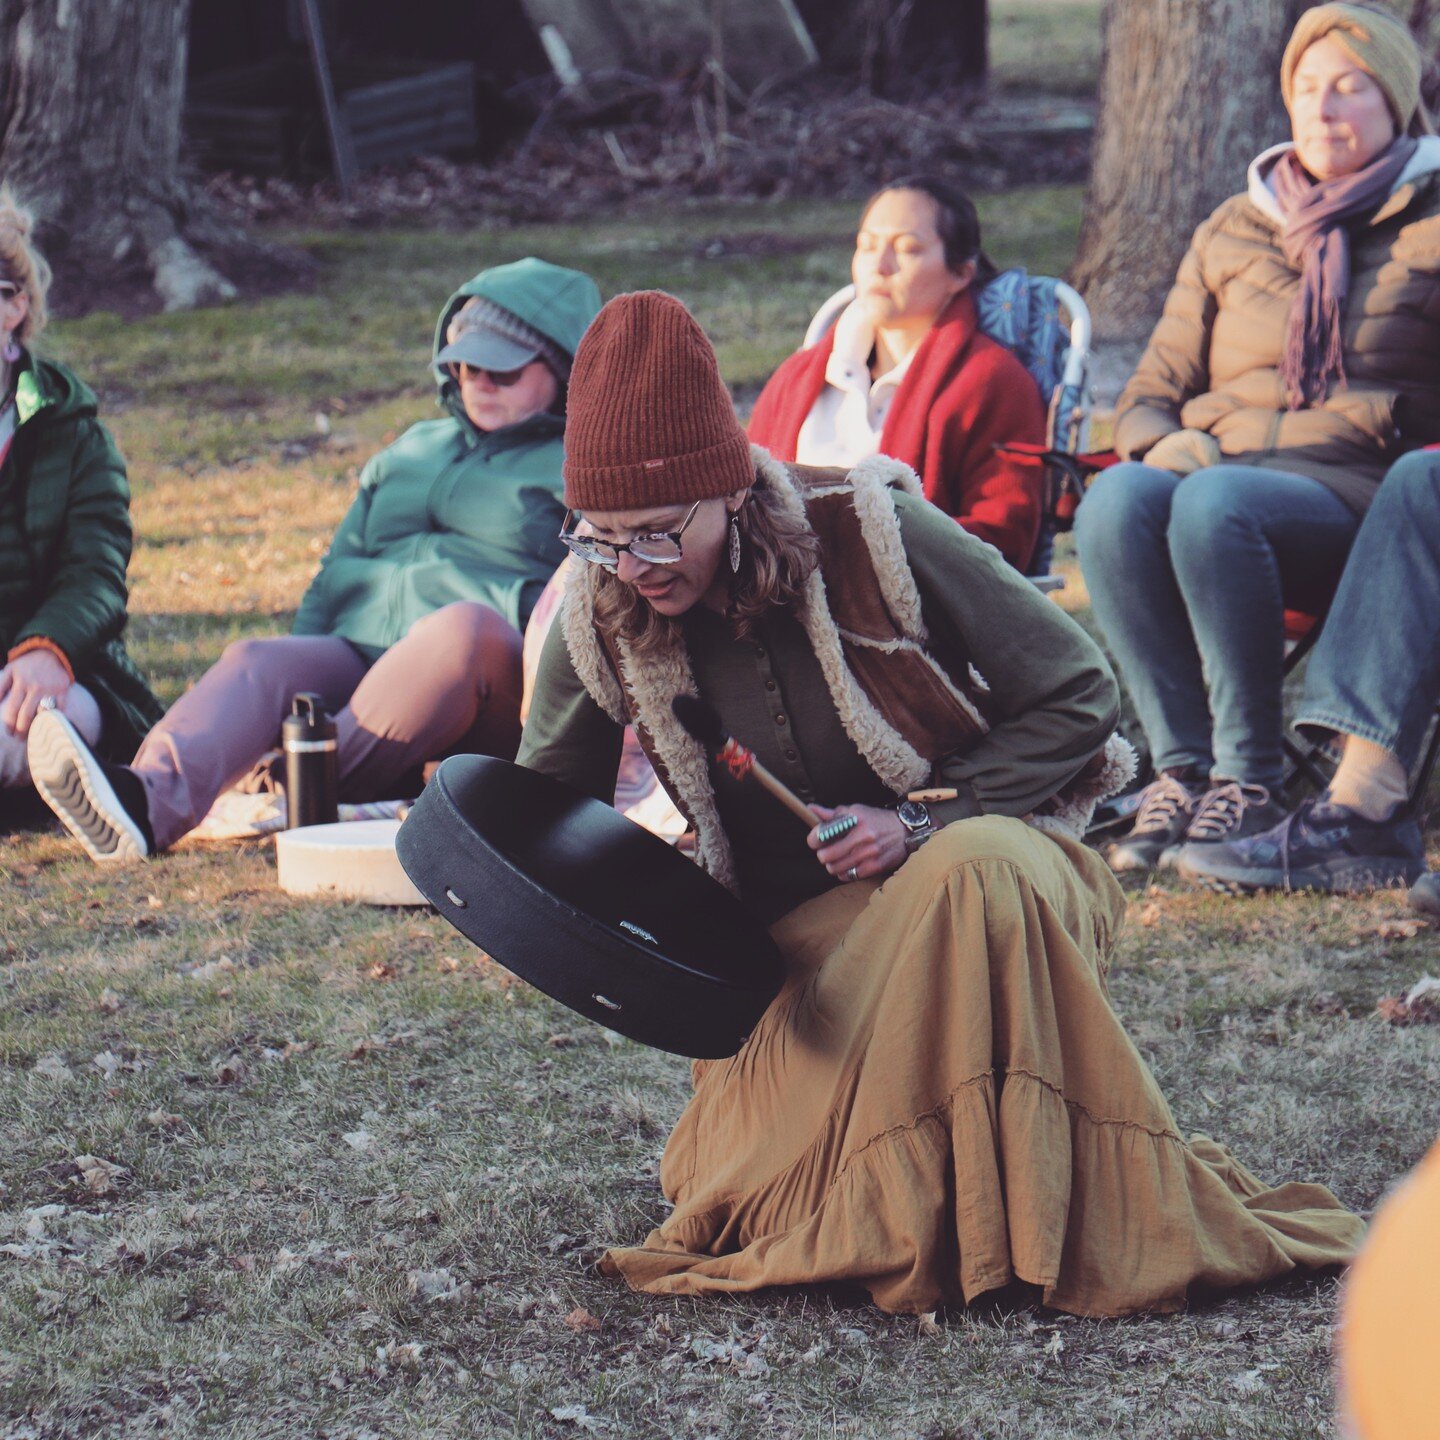 In-person guided shamanic journeys + potlucks! 4/9 &amp; 4/23 + more to come. Free &amp; INDOORS in McFarland, WI. Full details👉 link in bio.
​
Shamanic journeying is an active practice. I guide in a way that opens a safe, pristine, calm, healing sp